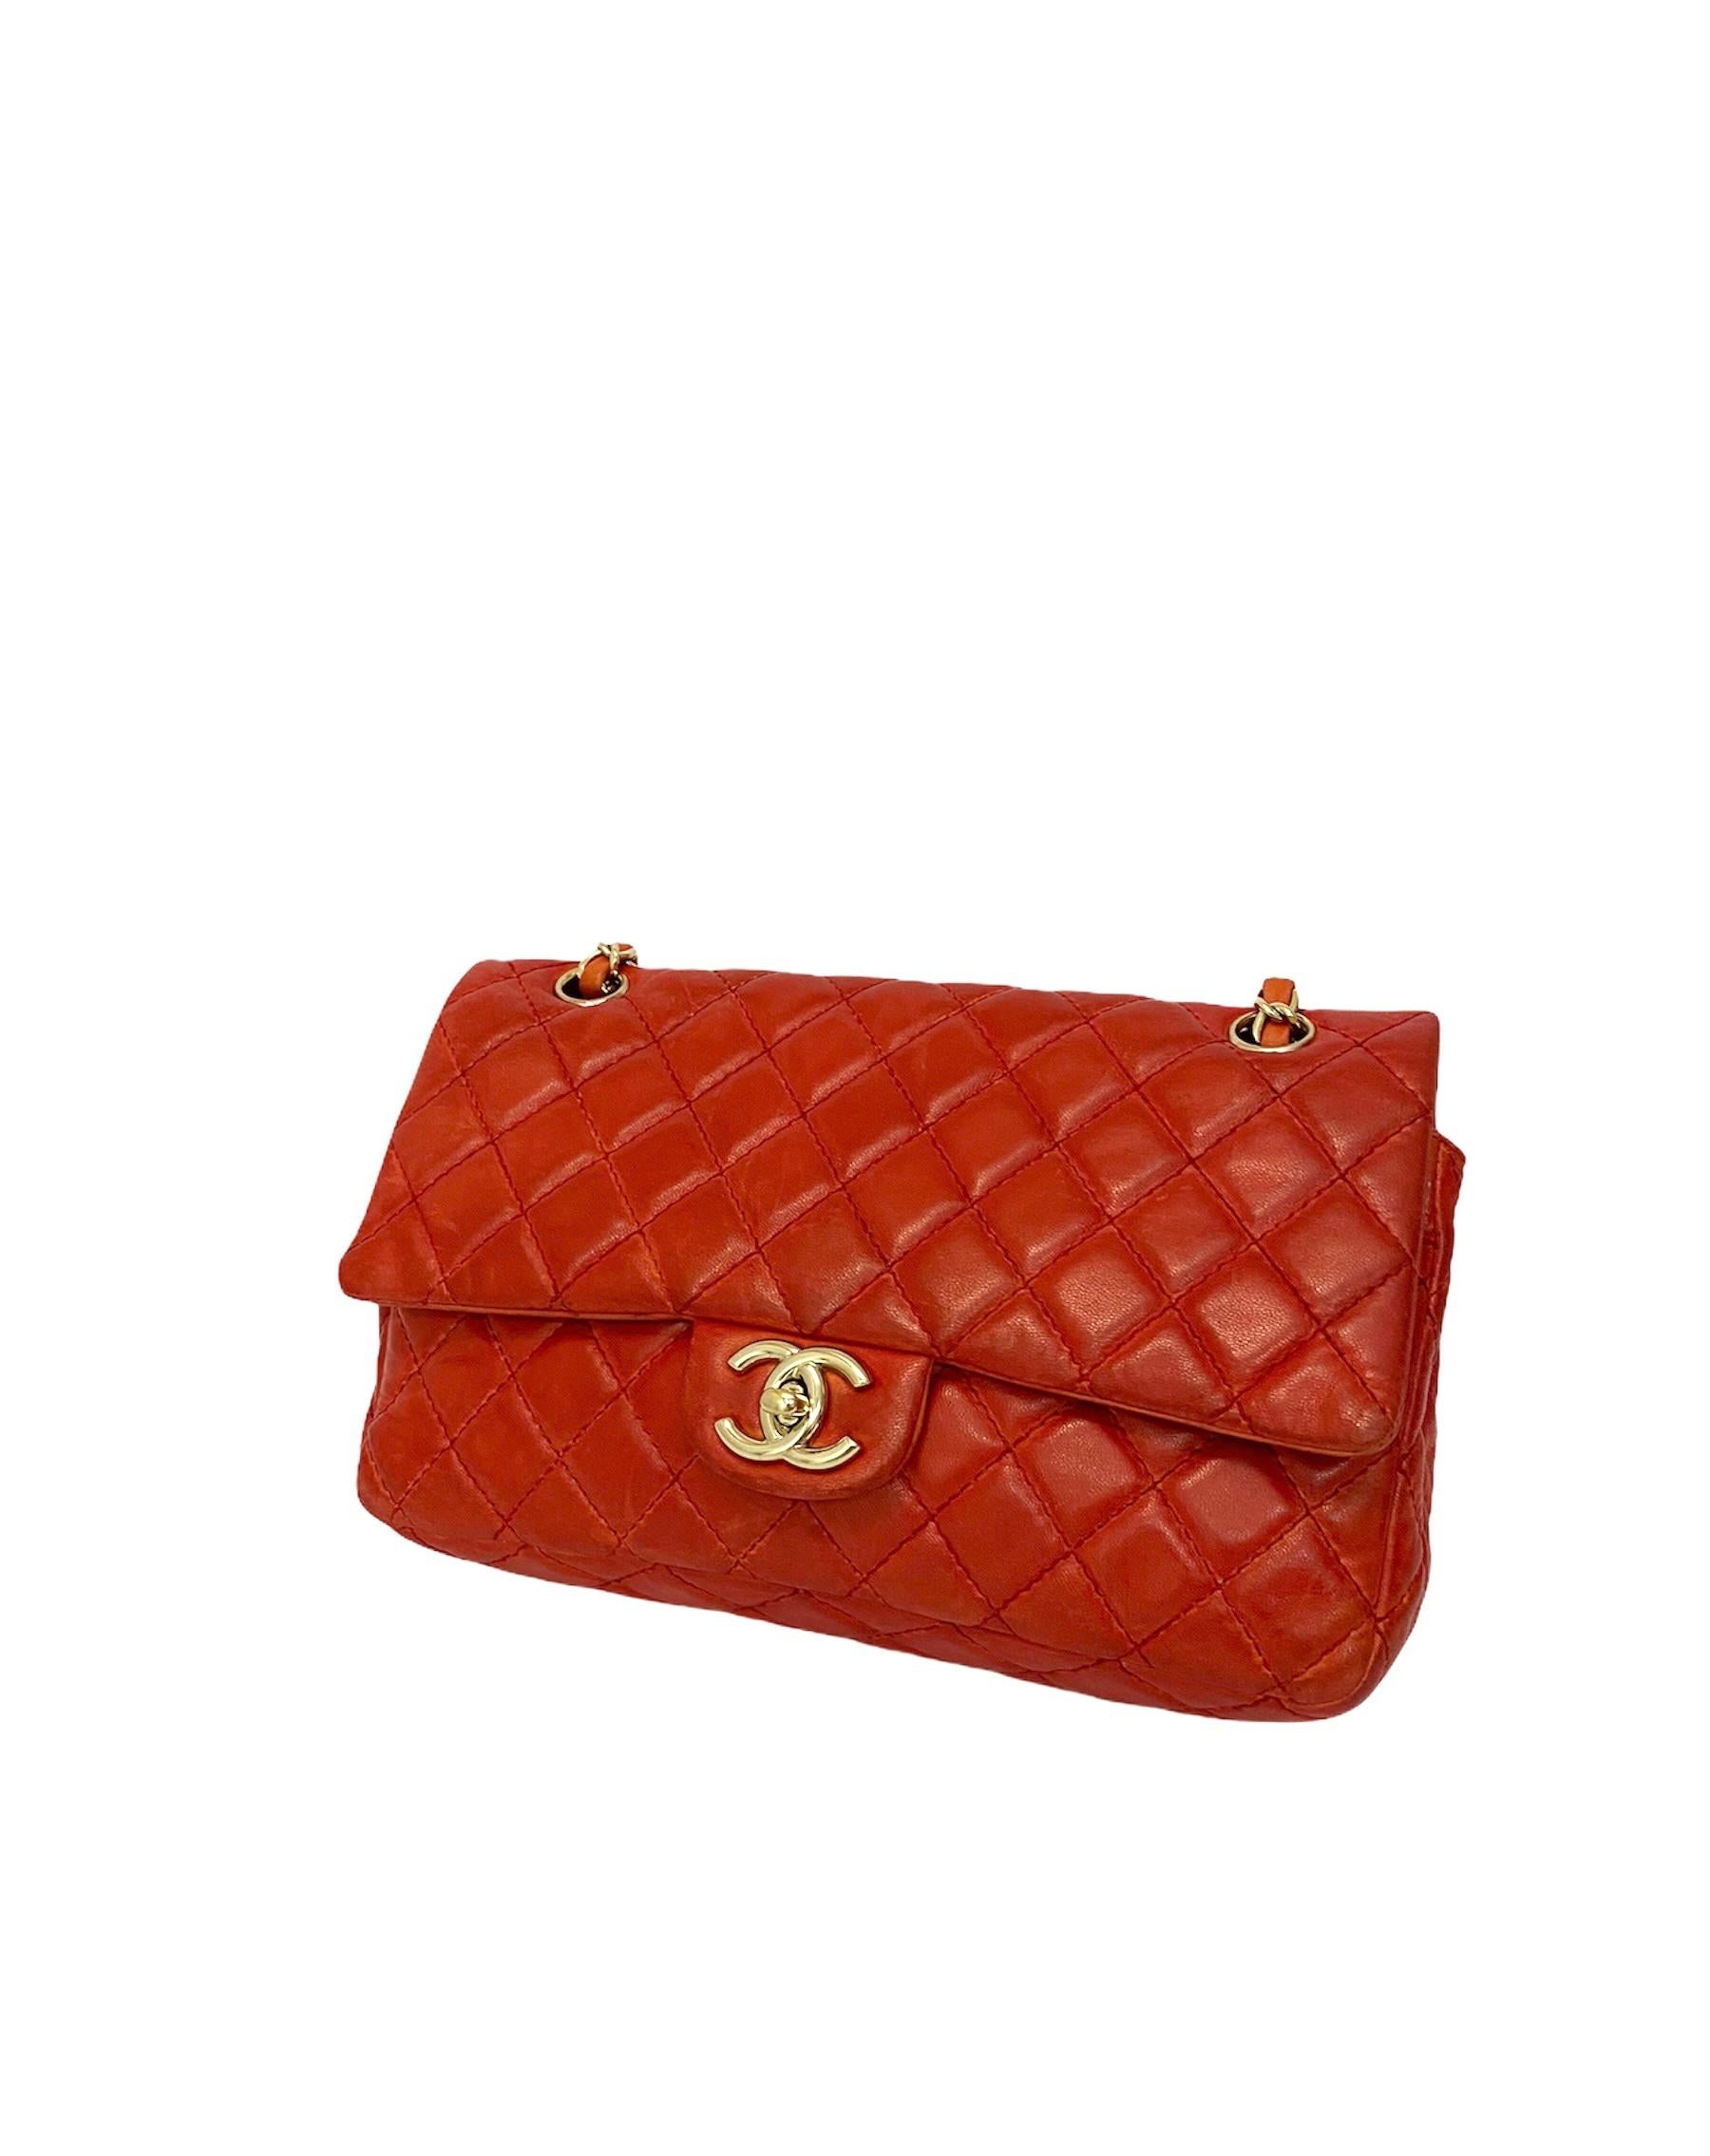 Women's Chanel 2.55 Red Leather with Golden Hardware